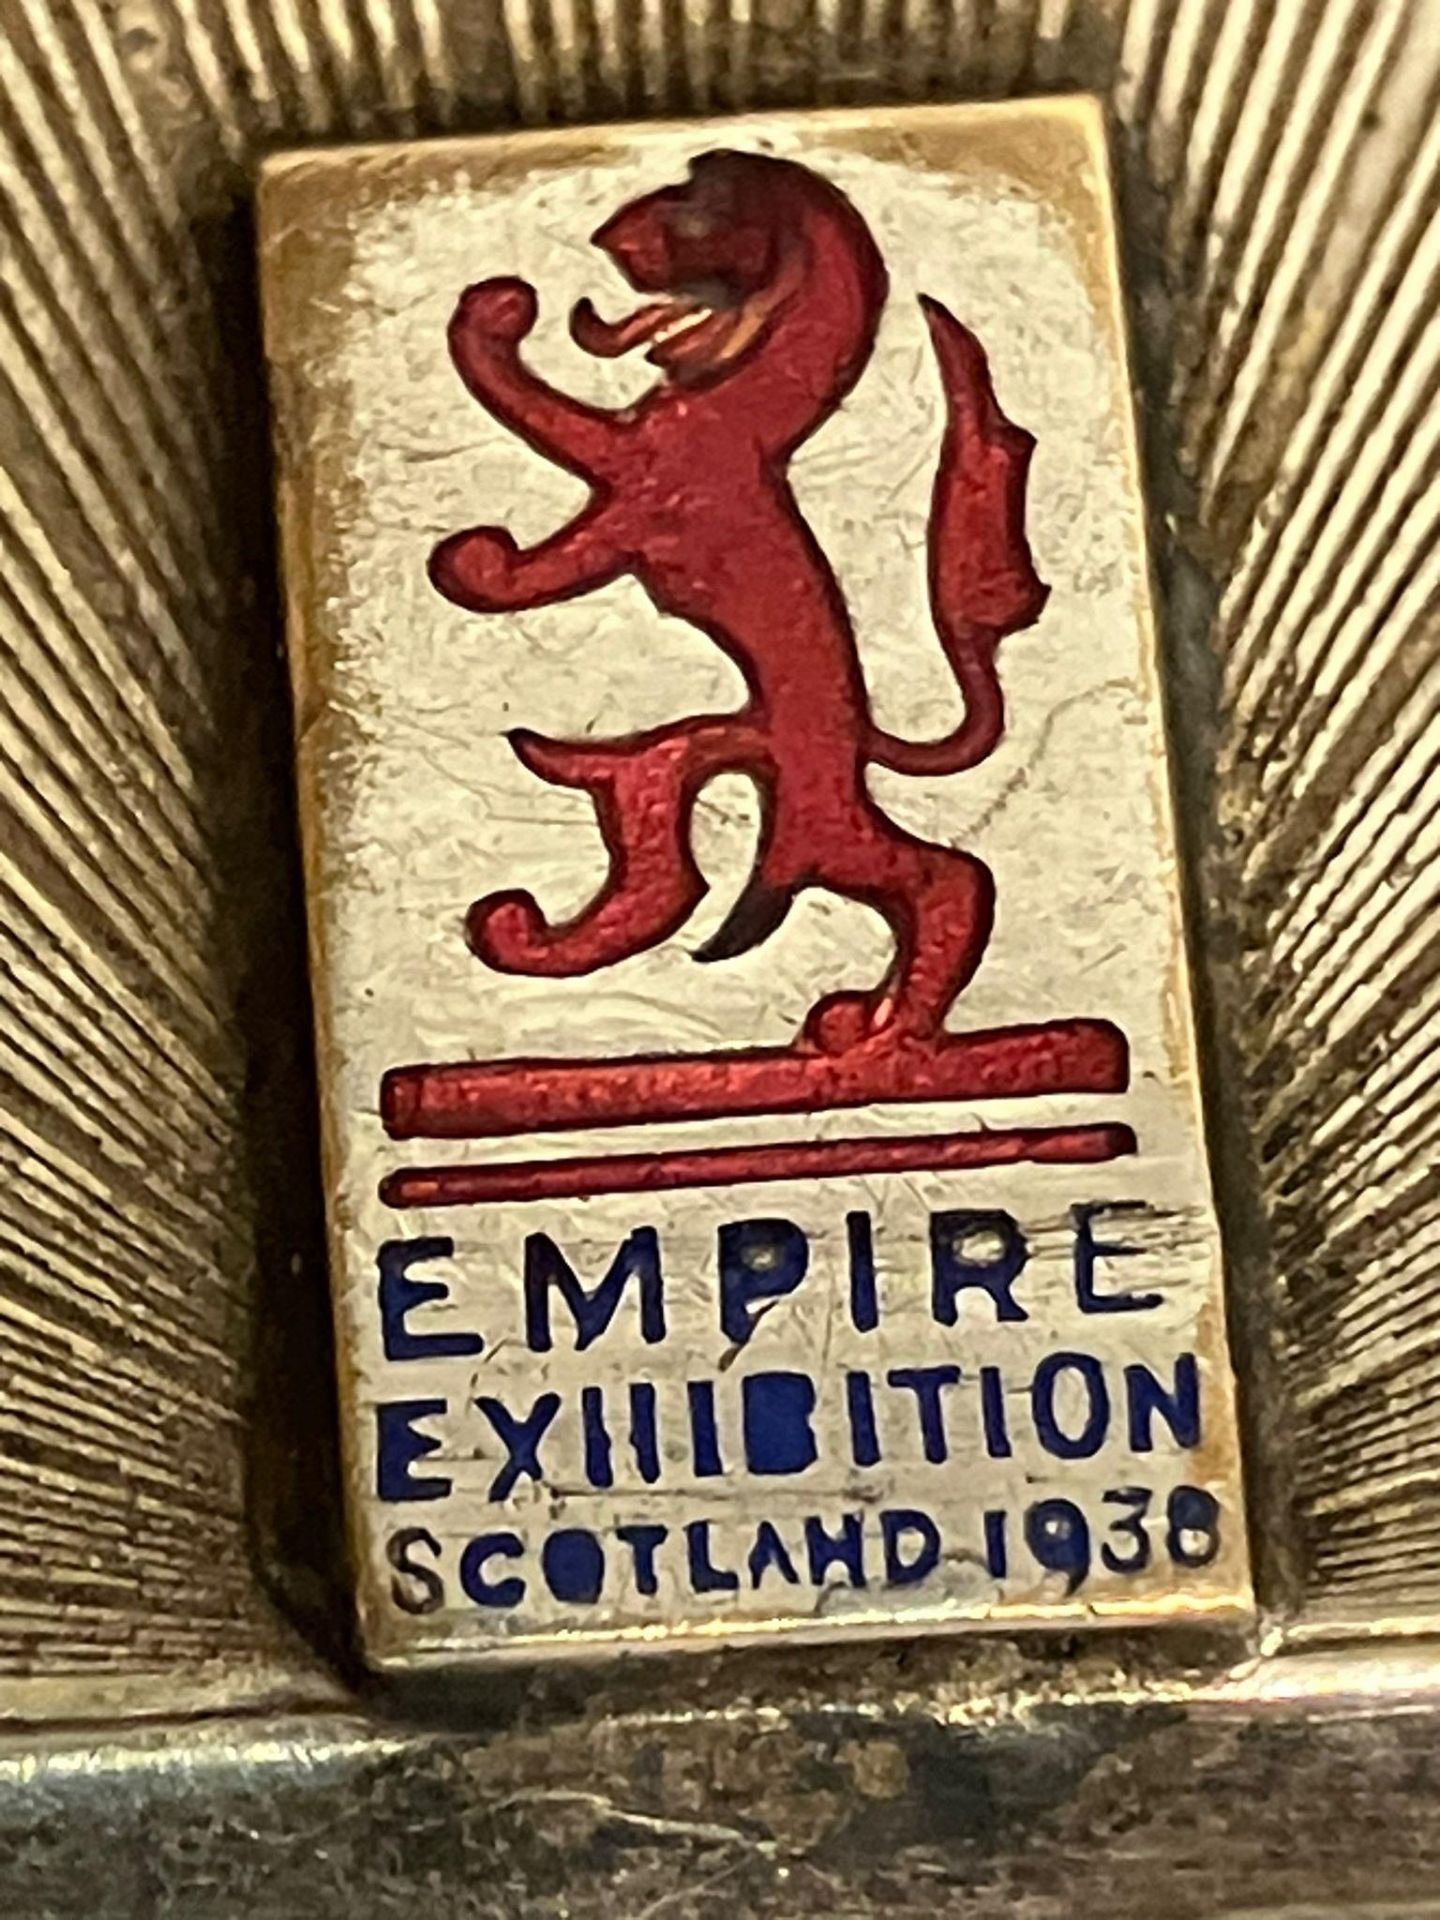 Antique SILVER PLATED MATCHBOOK CASE having the words EMPIRE EXHIBITION SCOTLAND 1938 with a rampant - Image 2 of 4